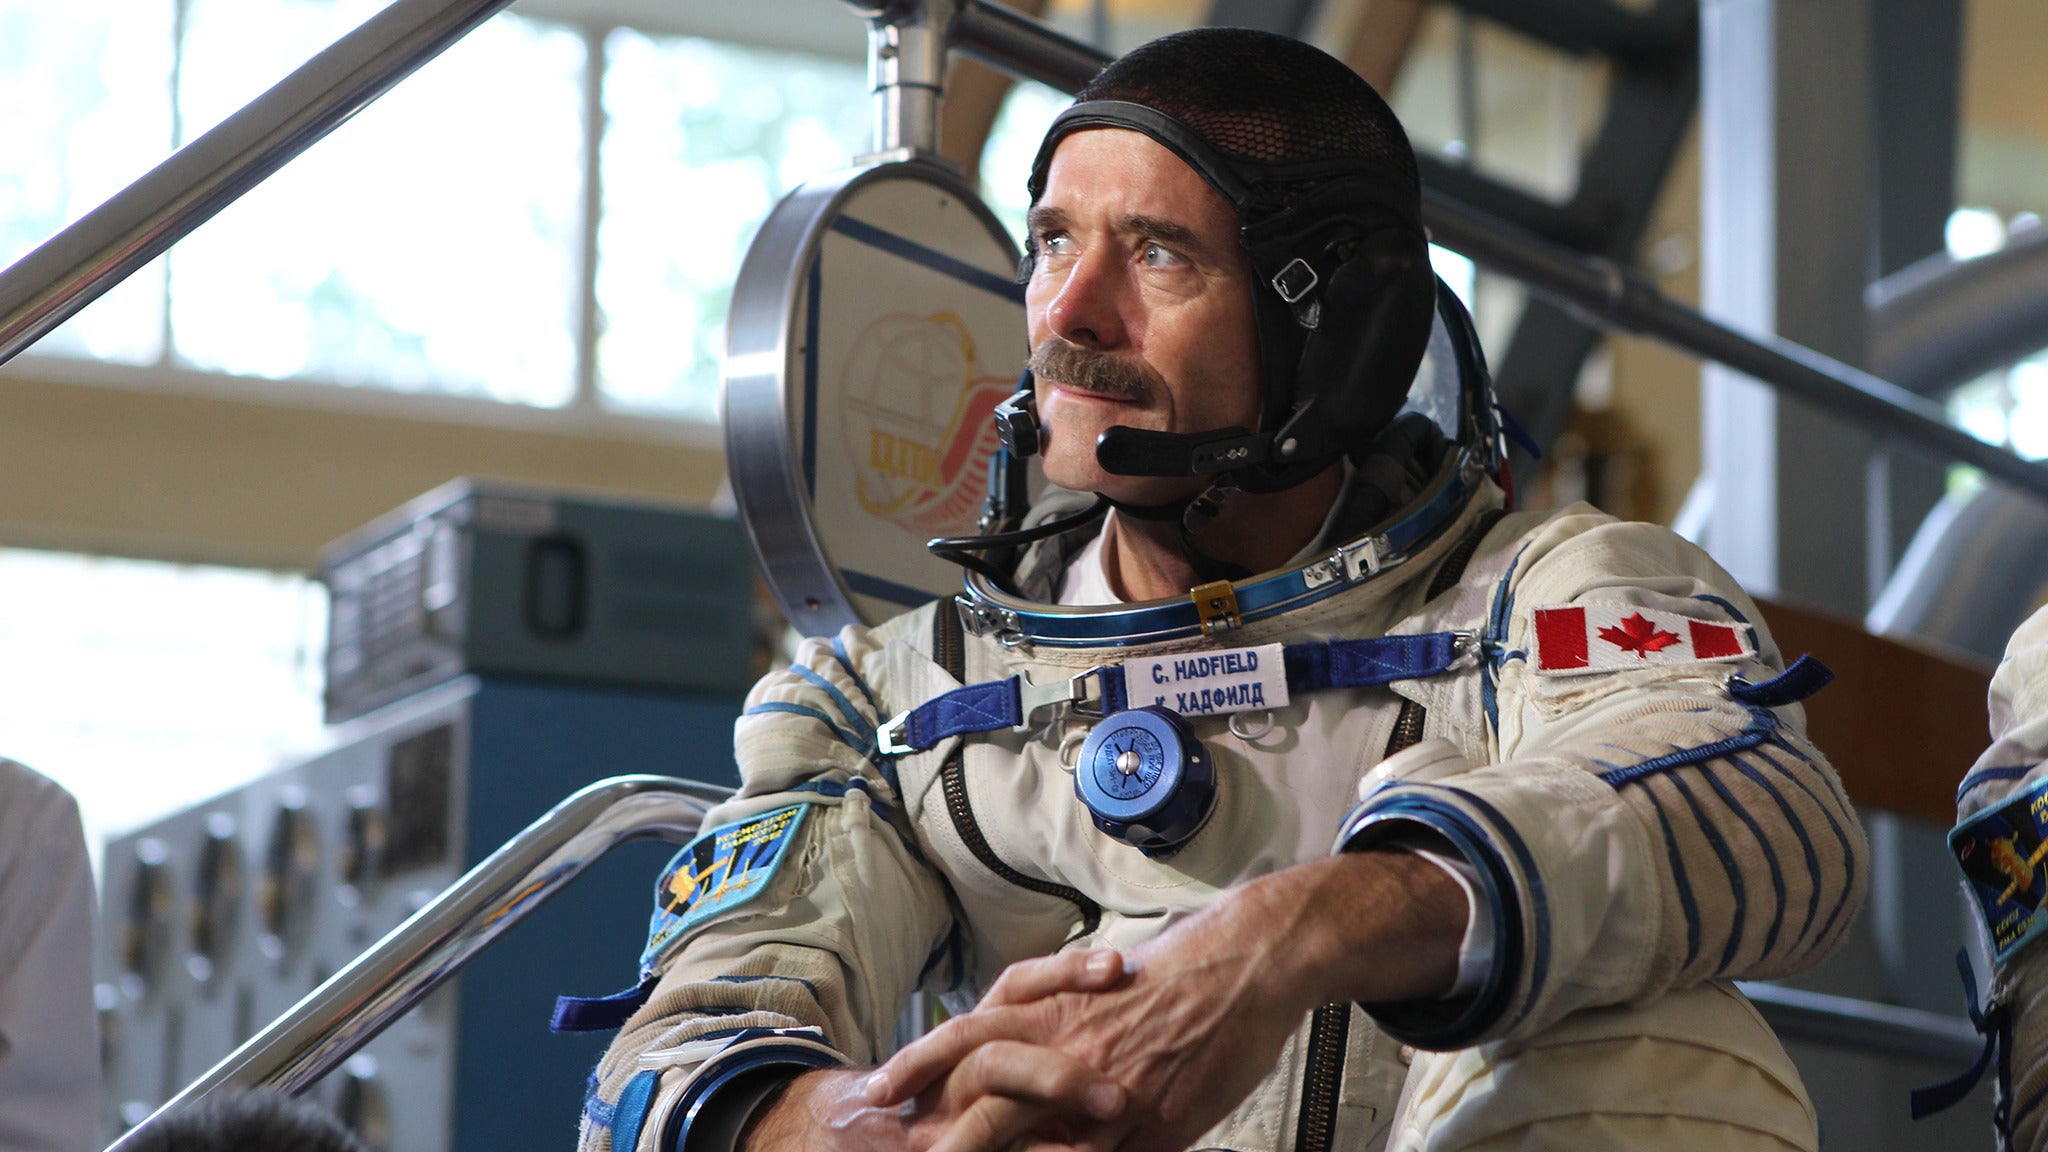 Chris Hadfield VIP Upgrade (Ticket Not Included) in London promo photo for VIP presale offer code